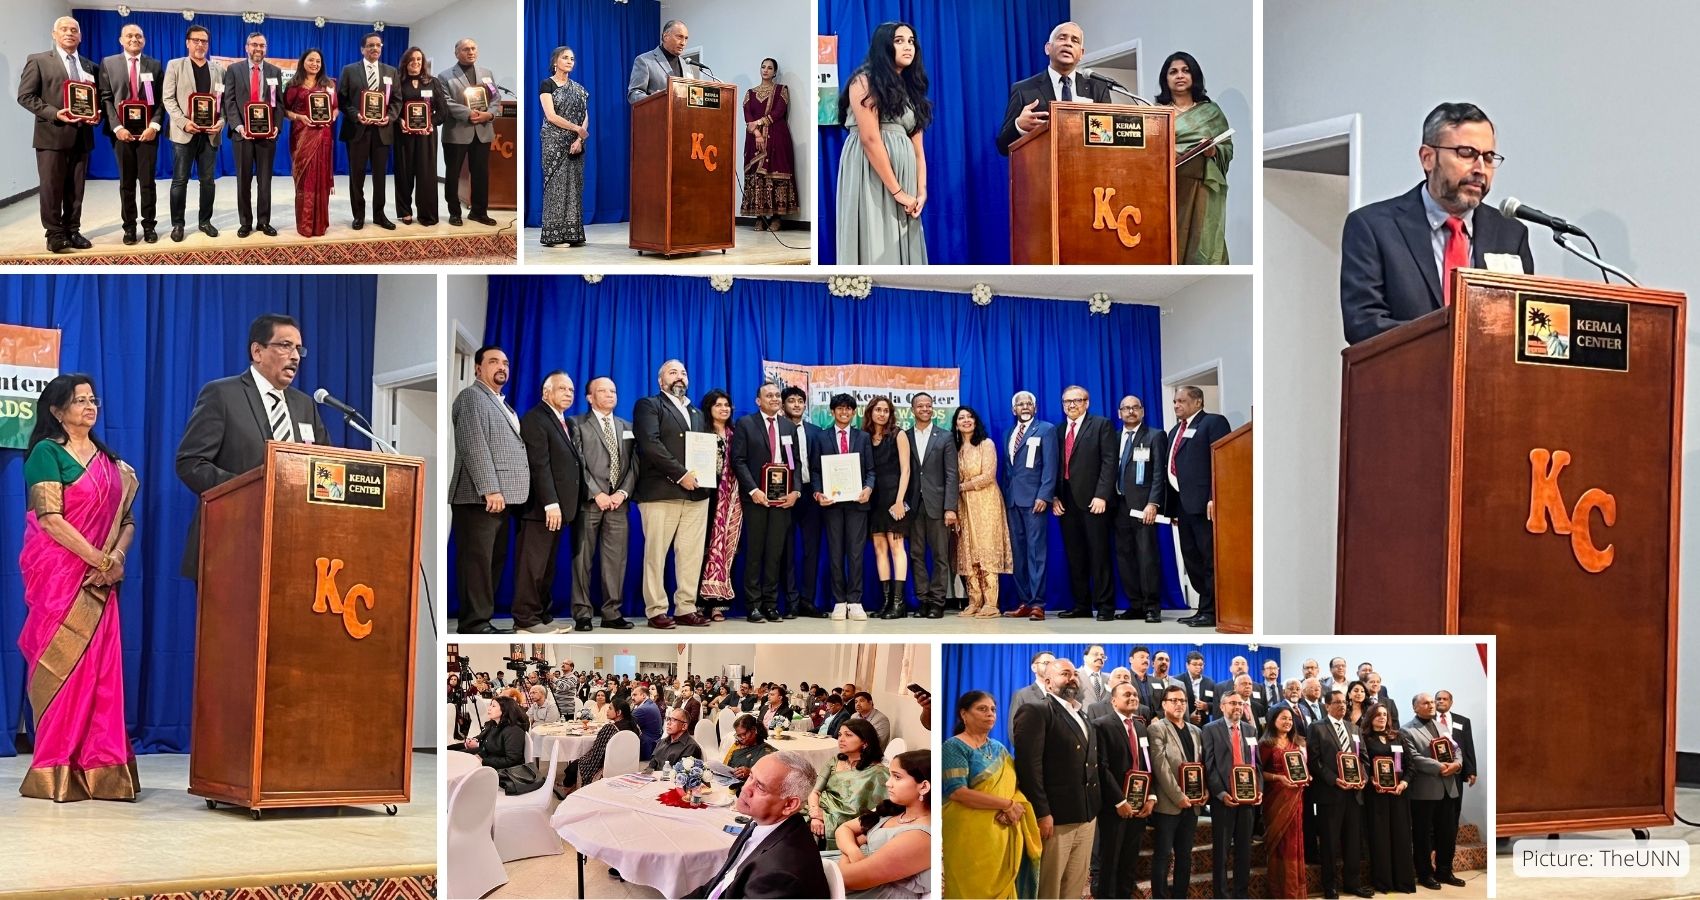 The Kerala Center Honors 8 Distinguished NRIs At Annual Gala